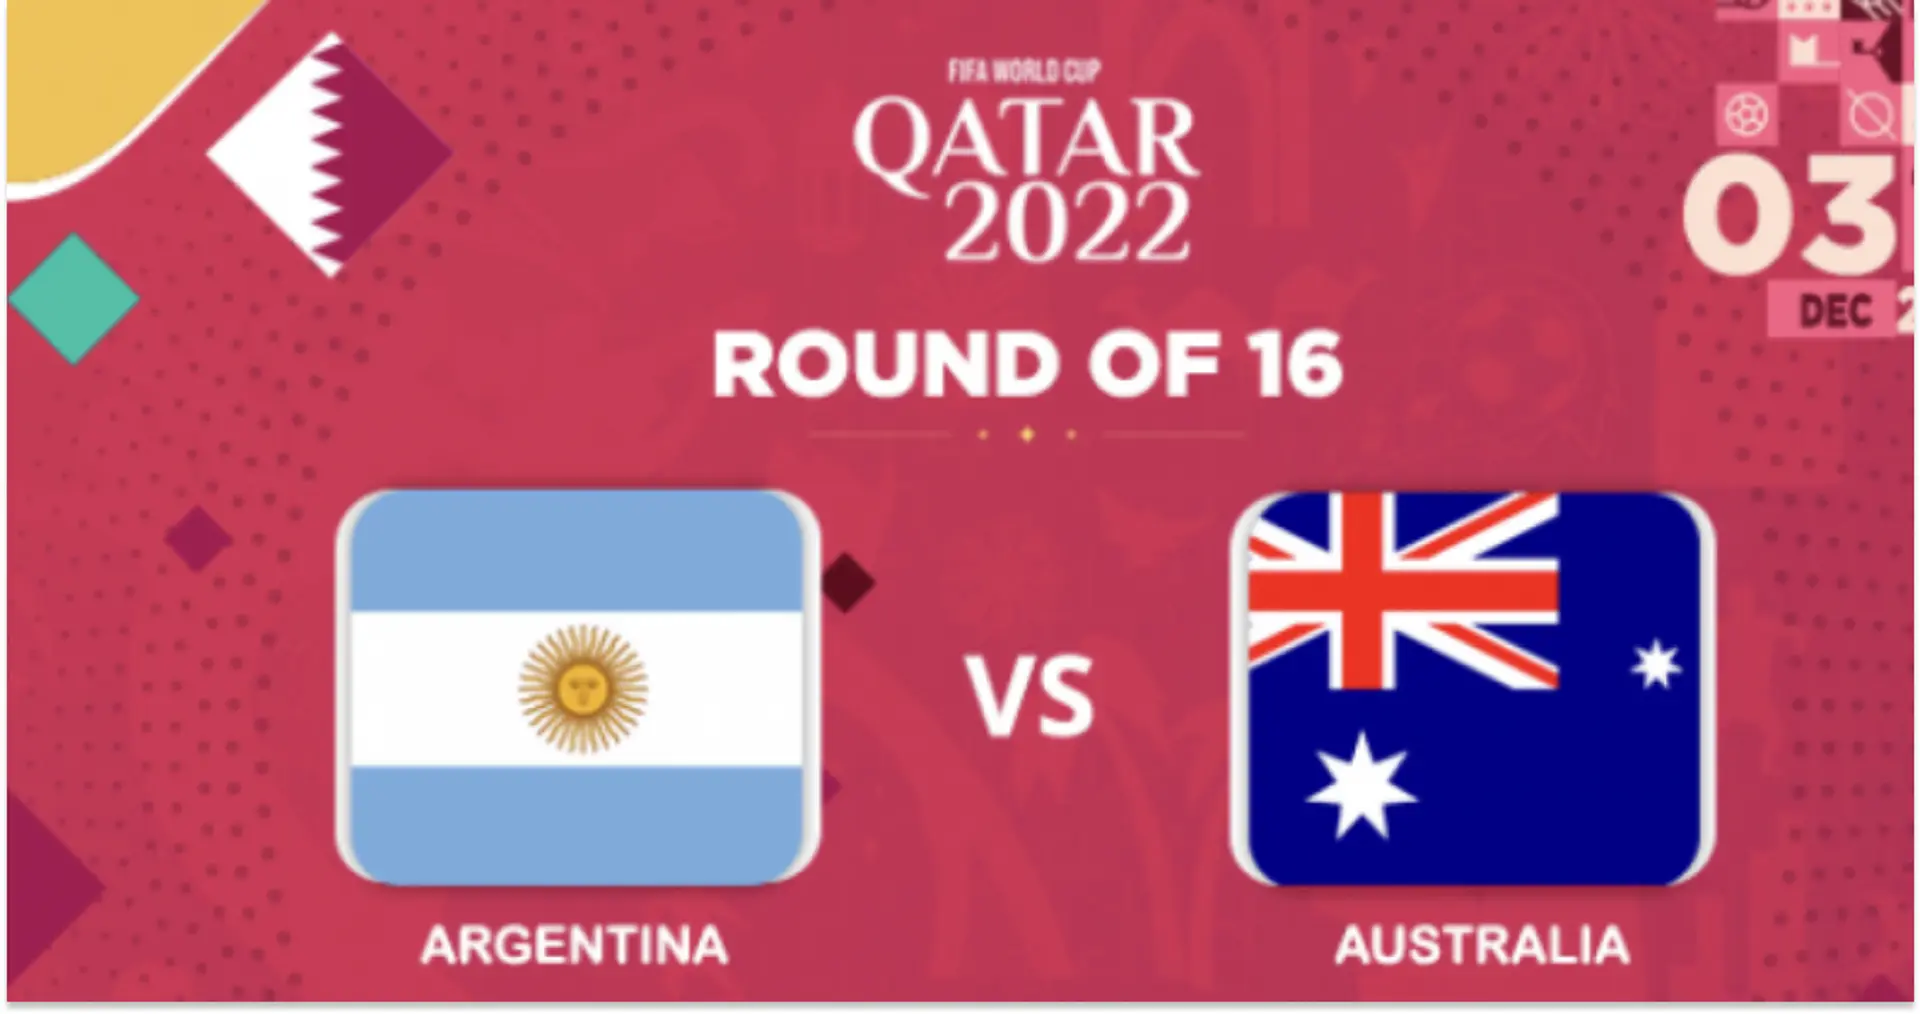 Argentina vs Australia: Official team lineups for the World Cup clash revealed